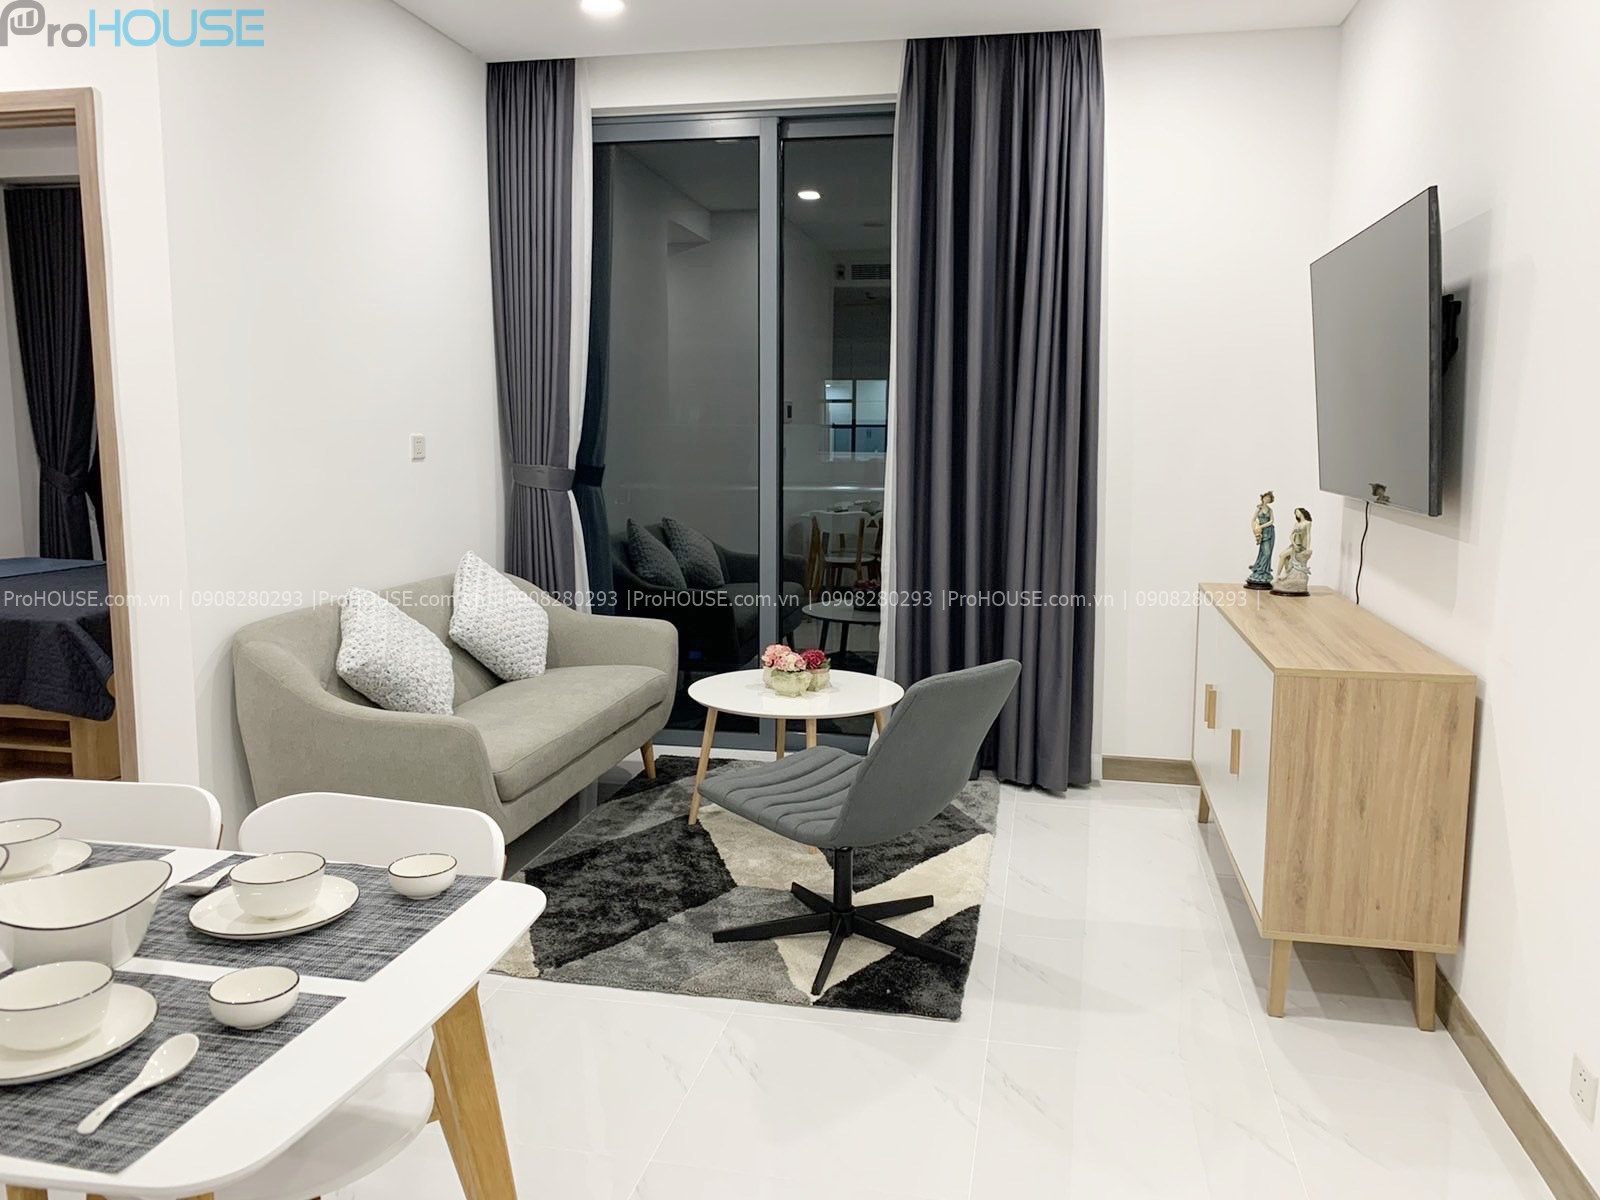 Nice 1BR apartment for rent in Sunwah Pearl with modern furniture